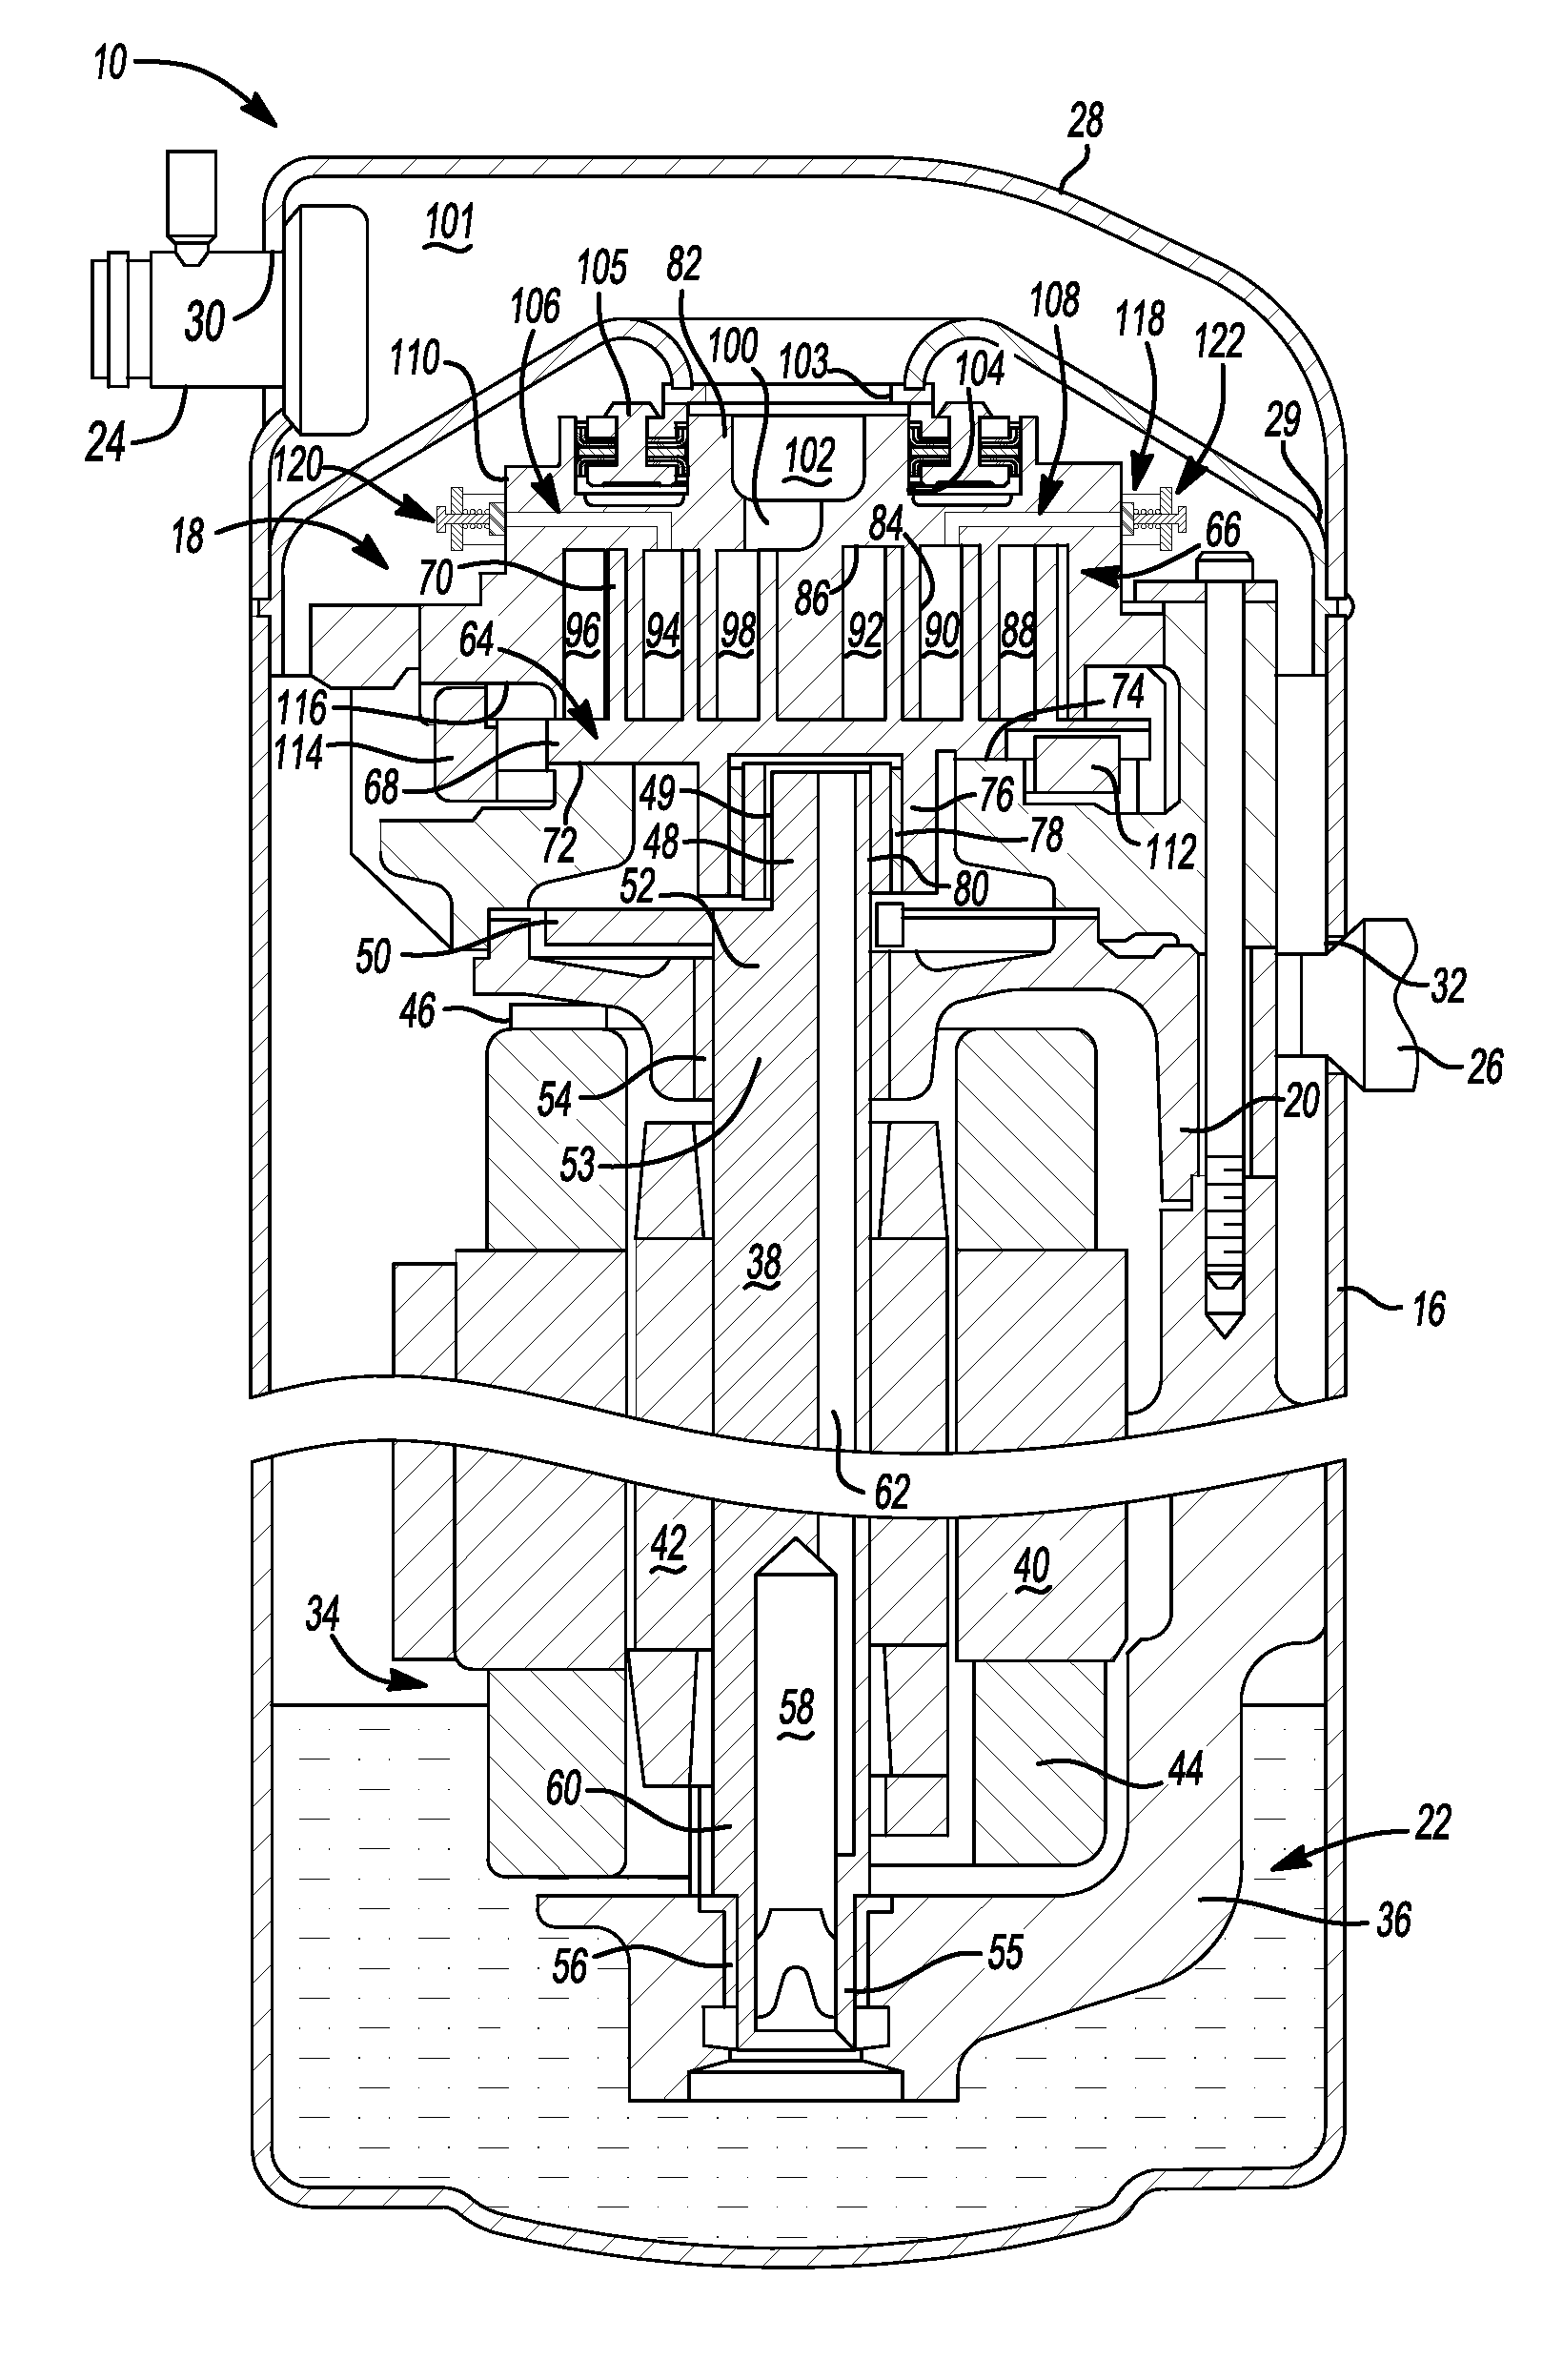 Scroll compressor with capacity modulation